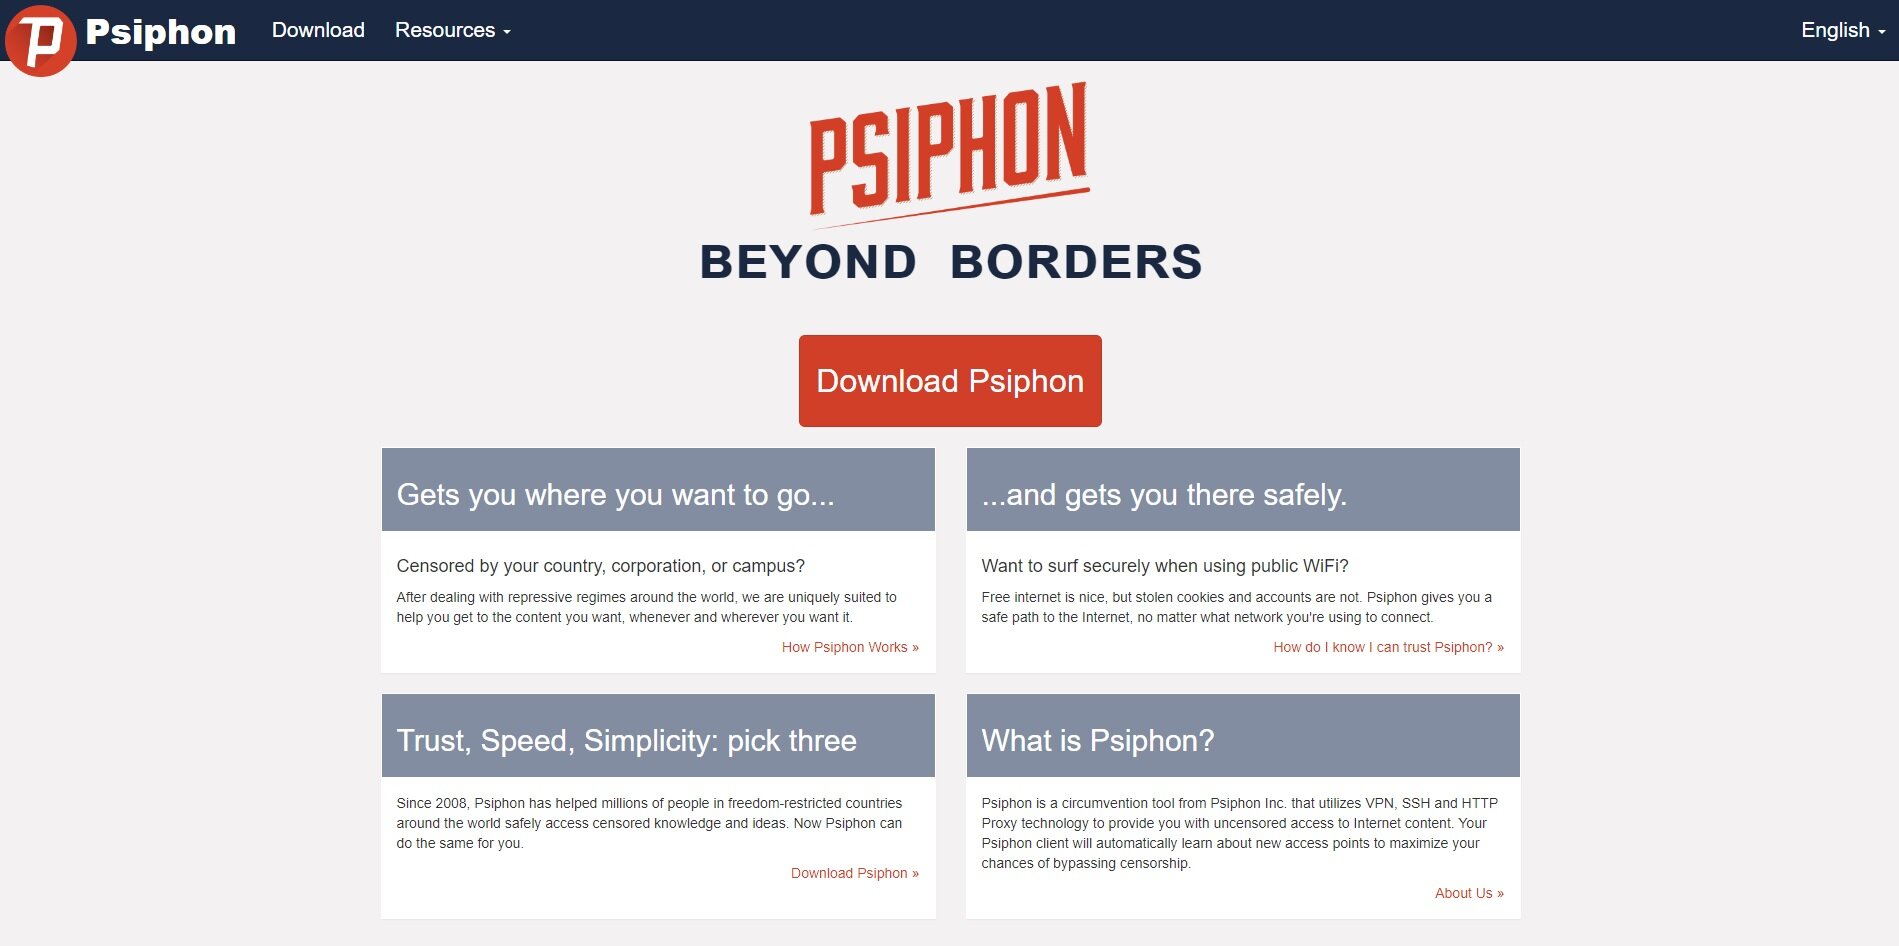 Psiphon3.com - Review and feedback on the free VPN service